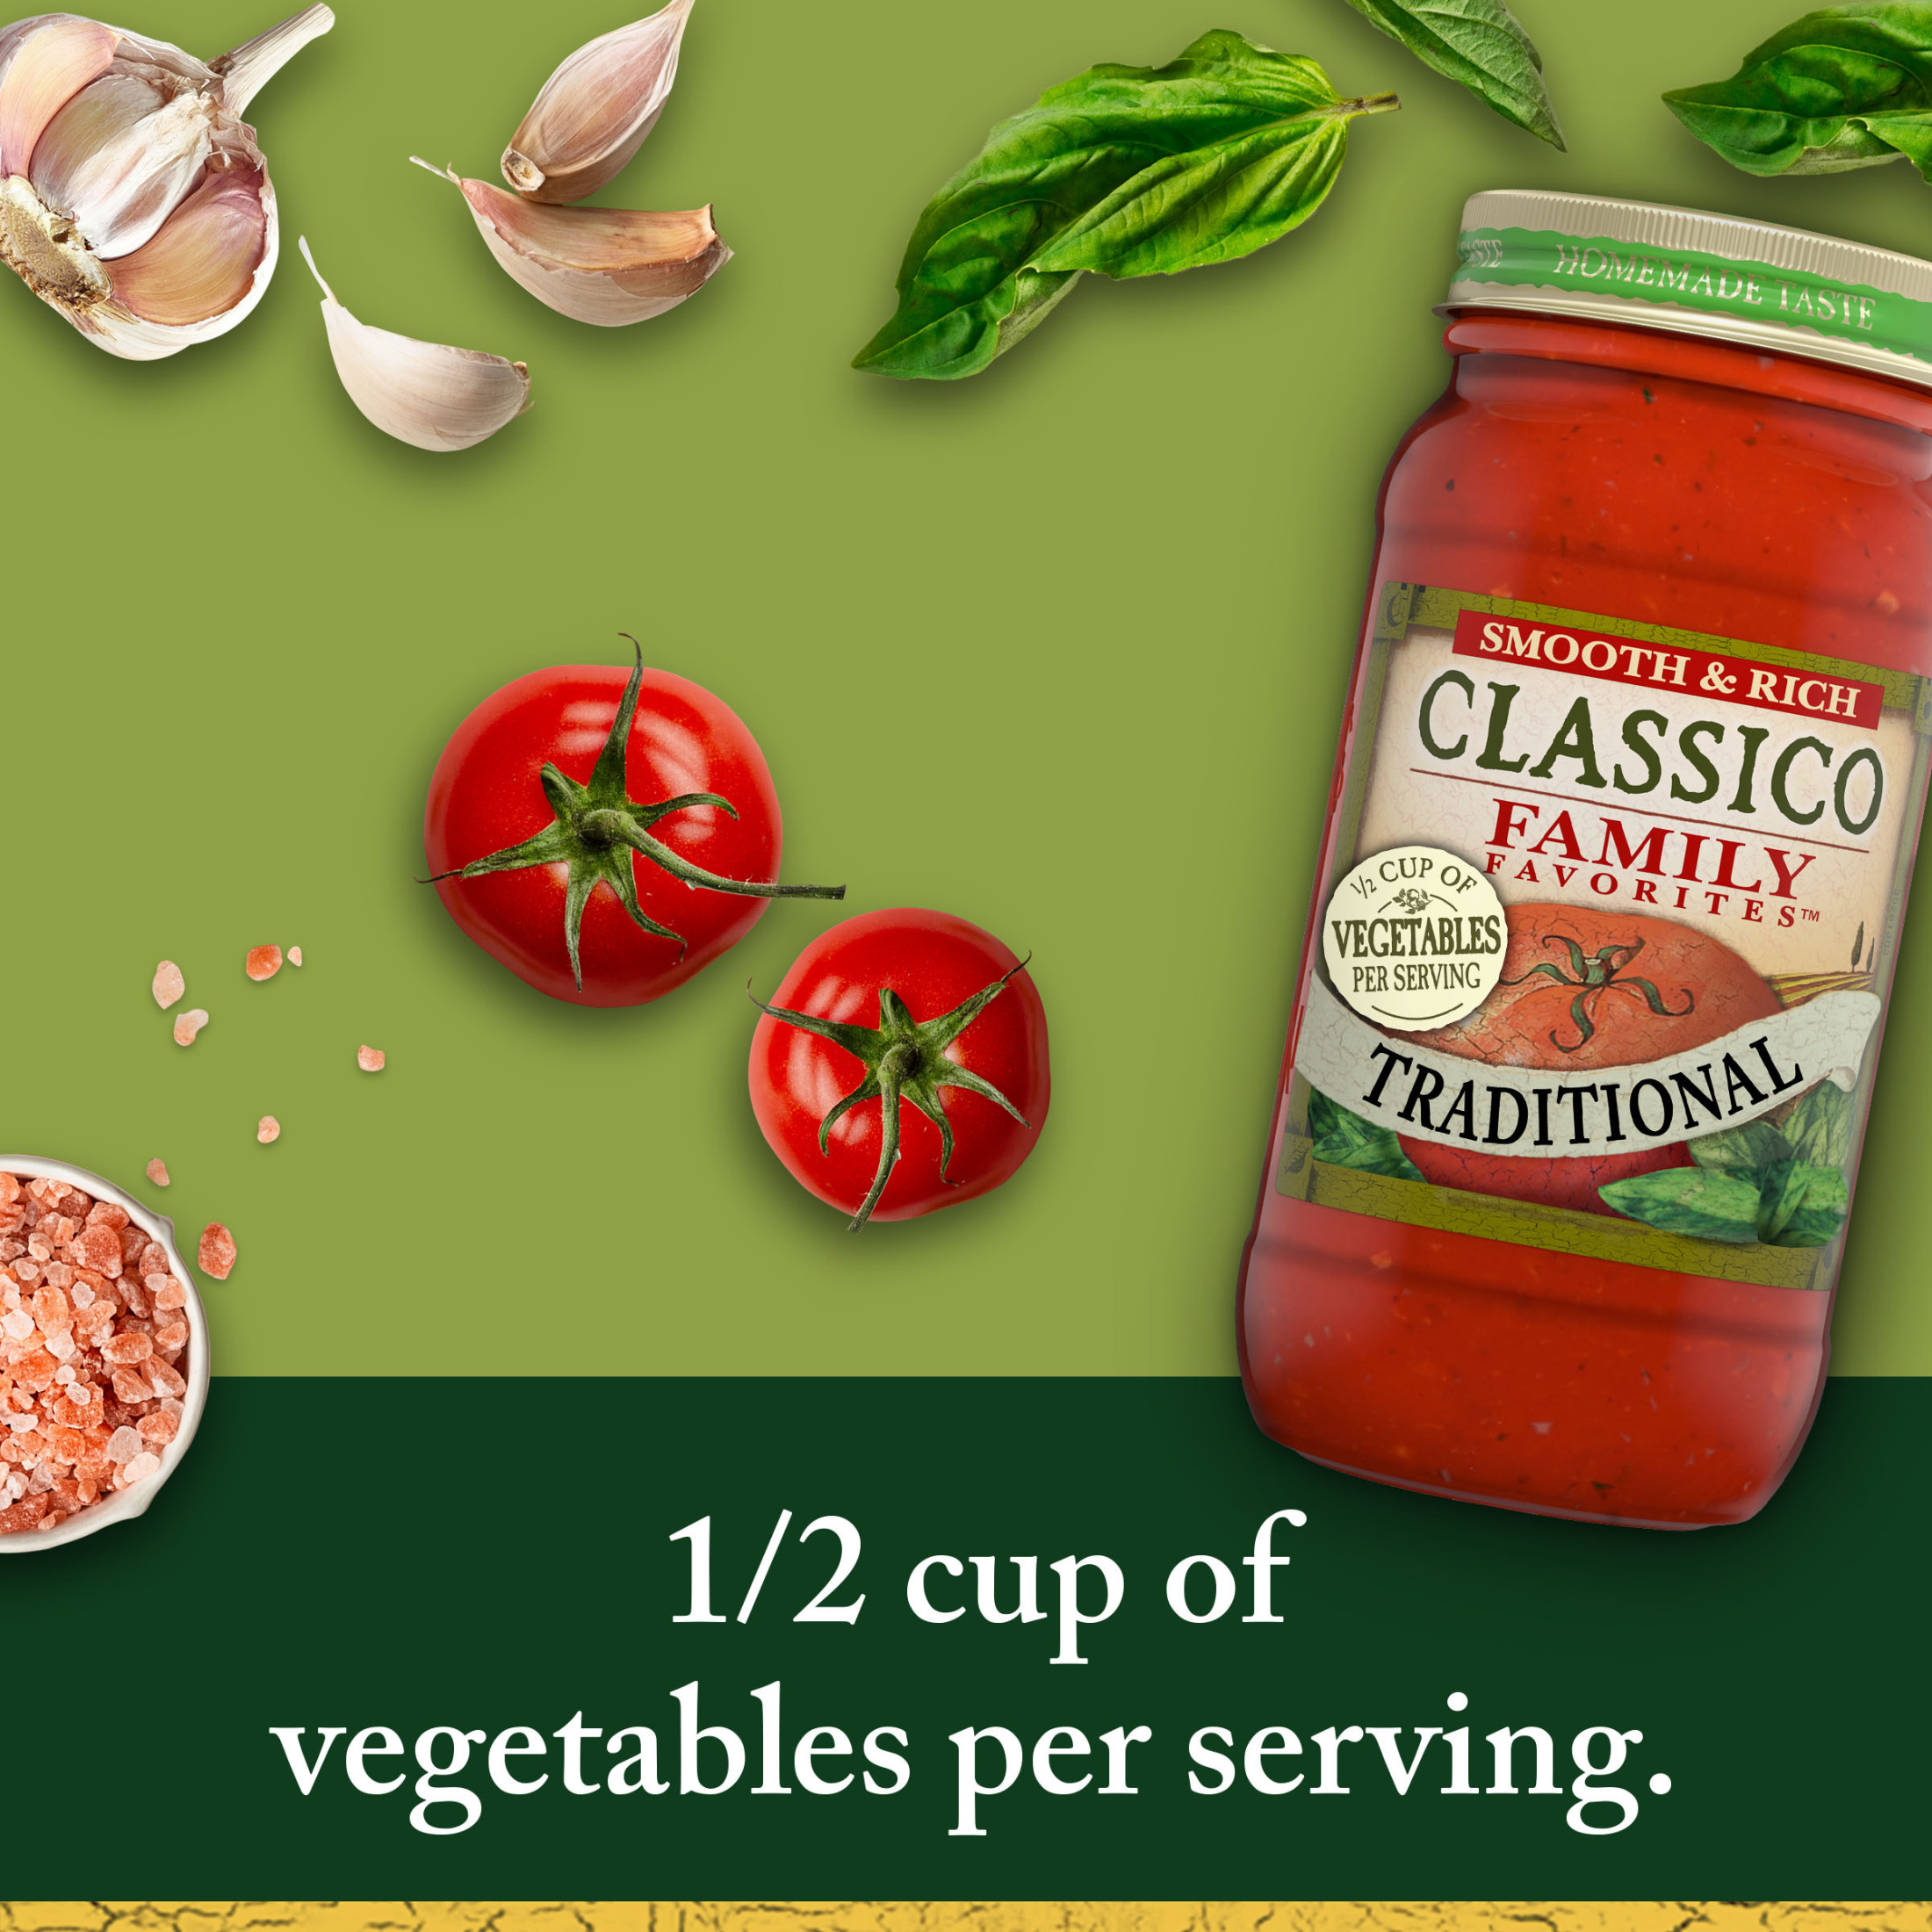 Classico Family Favorites Traditional Smooth & Rich Spaghetti Pasta Sauce, 24 oz. Jar - image 2 of 13